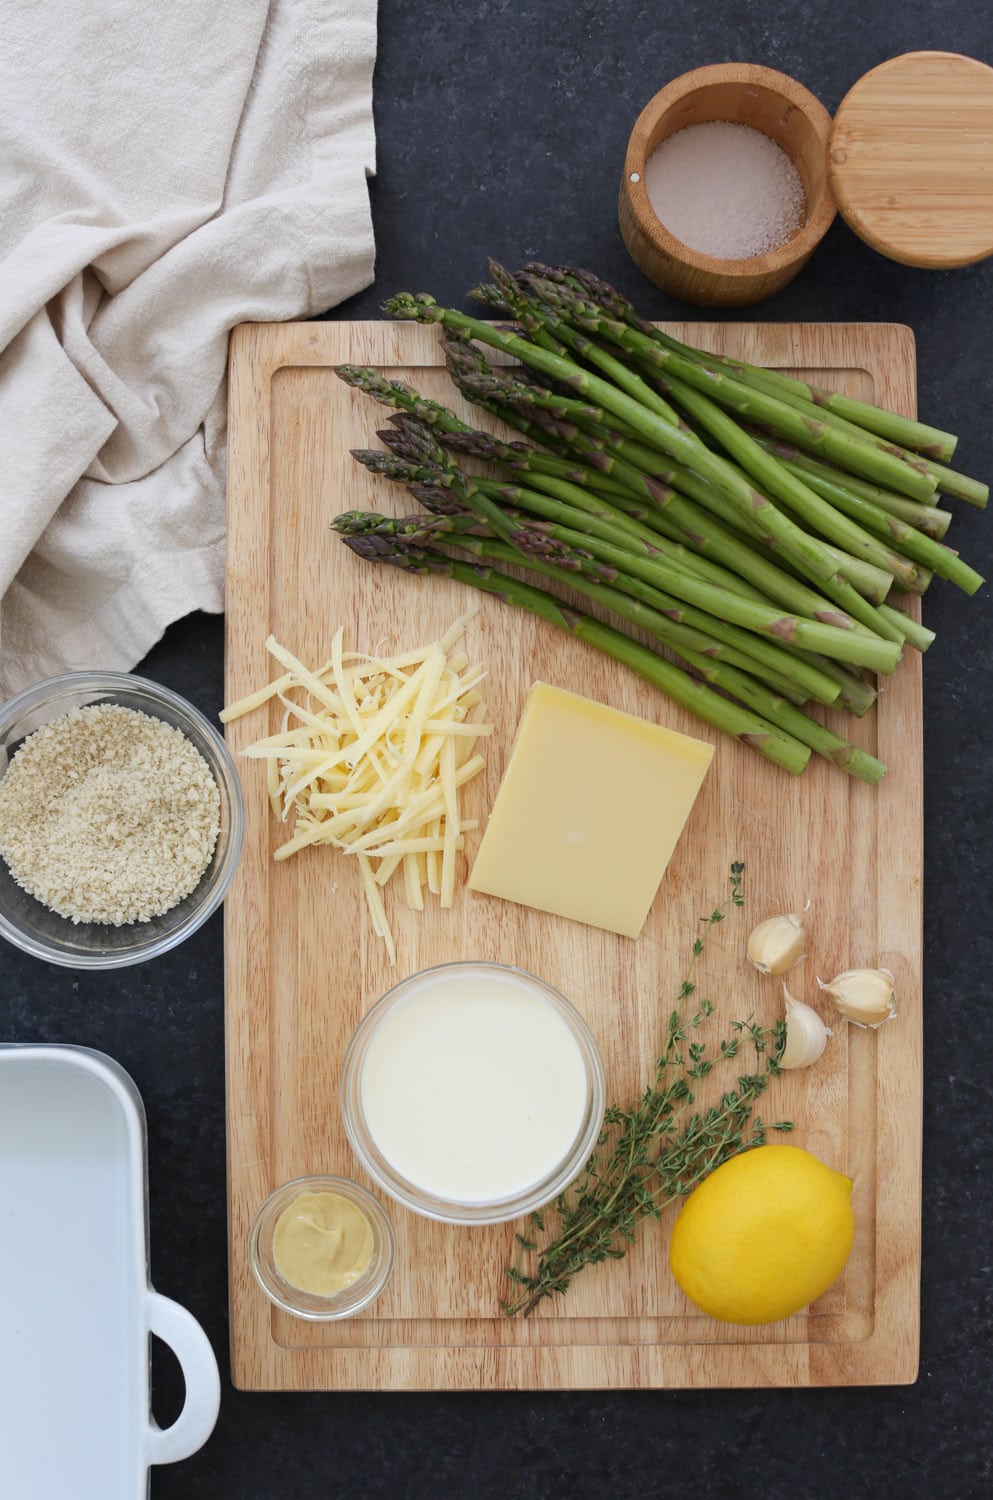 Overhead view of all ingredients for asparagus gratin.
